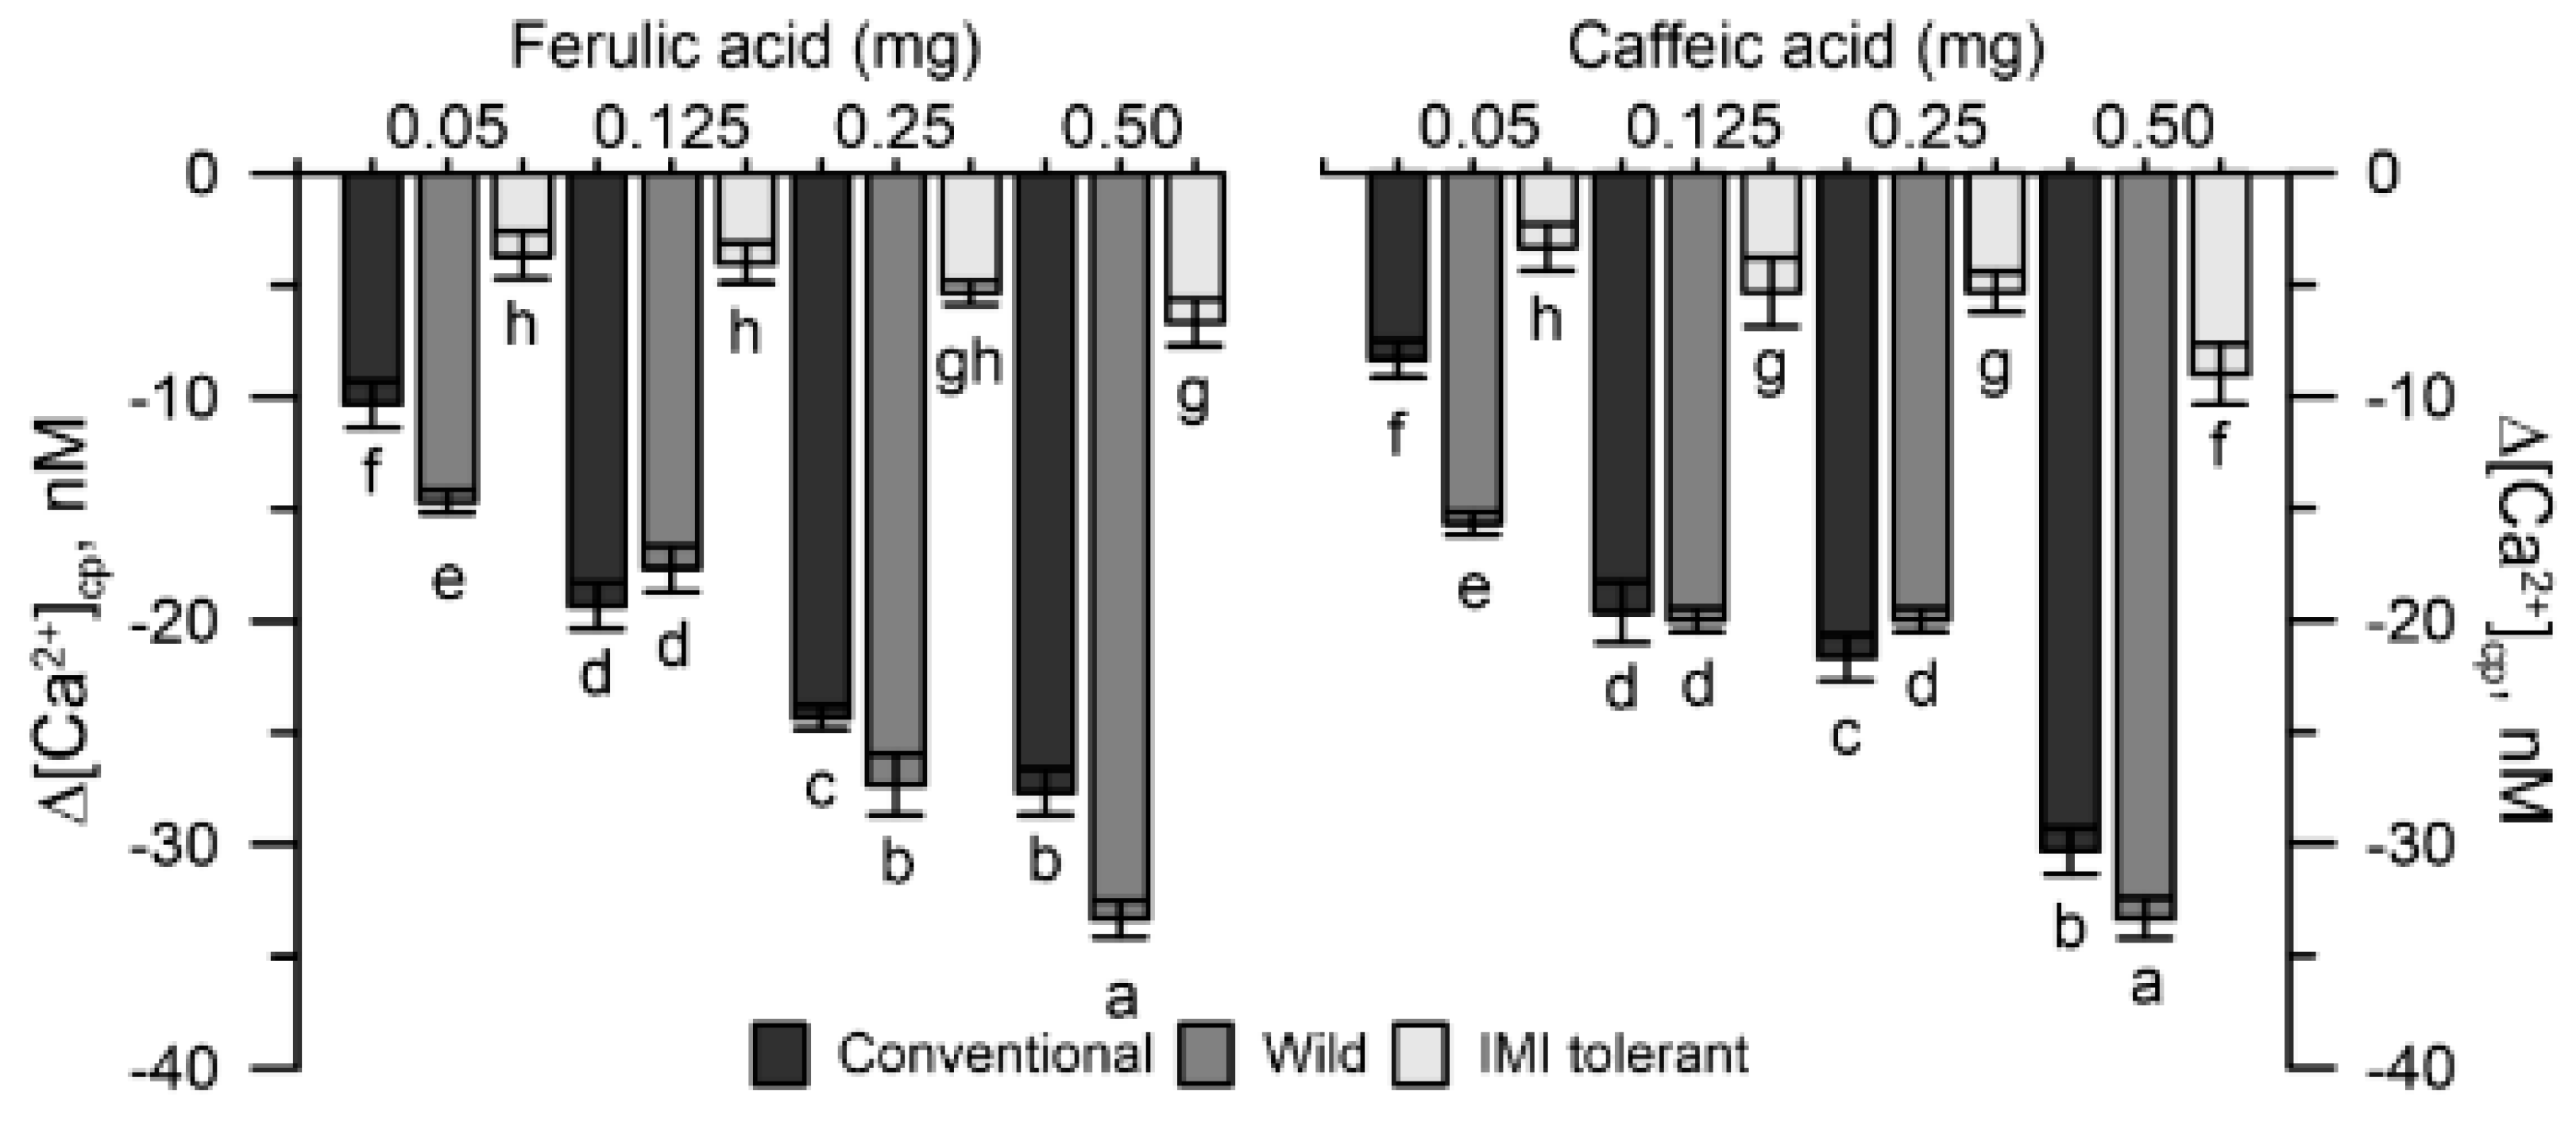 Plants Free Full Text Selective Inhibition Of Wild Sunflower Reproduction With Mugwort Aqueous Extract Tested On Cytosolic Ca2 And Germination Of The Pollen Grains Html